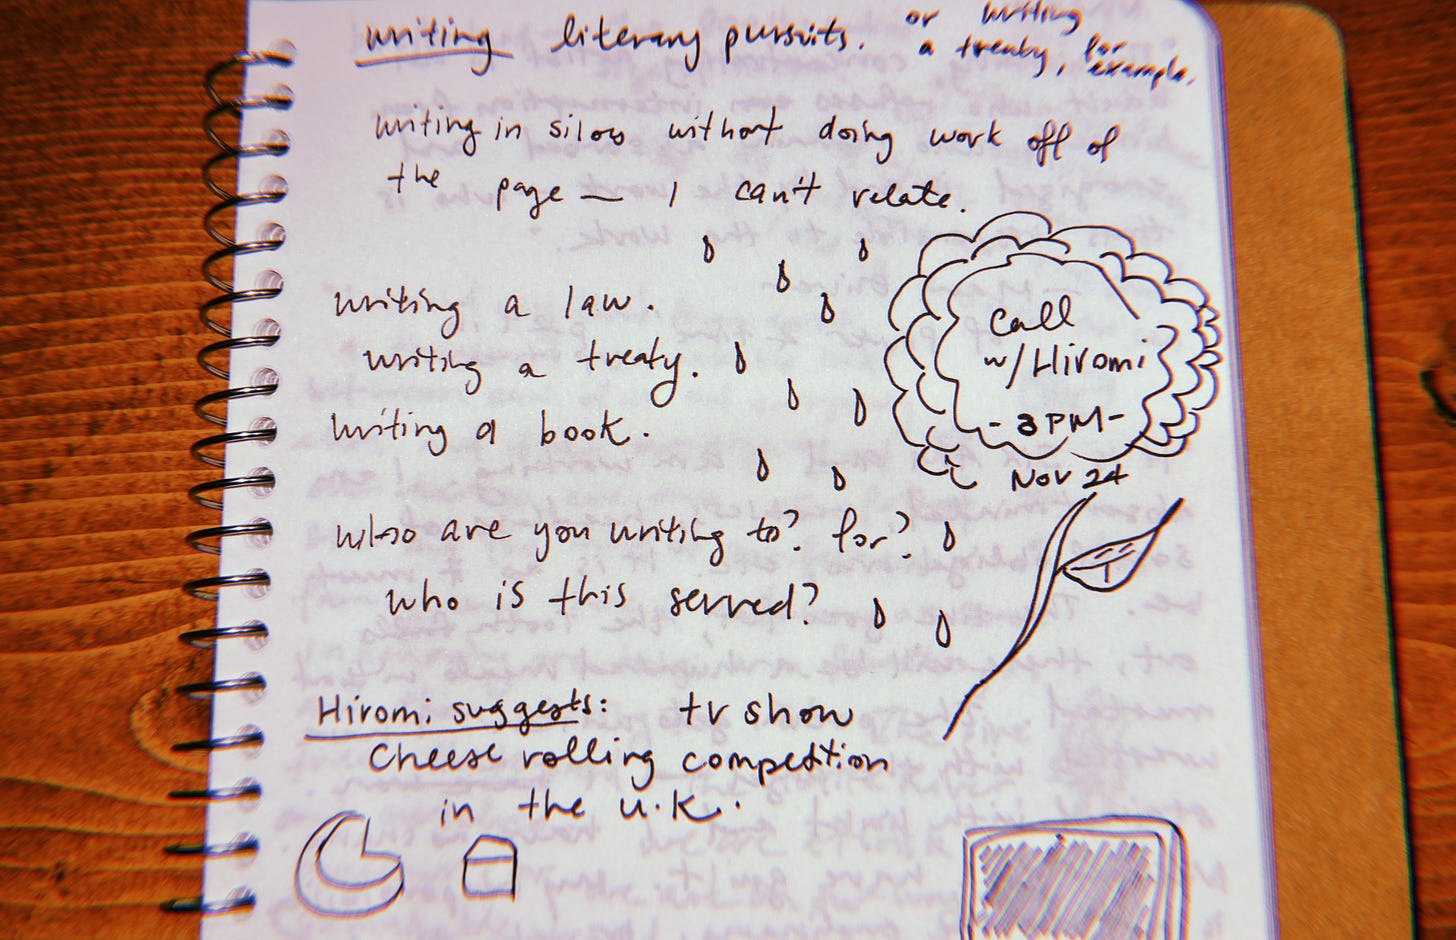 Photo of Erica's writing notebook with various thoughts and doodles, including raindrops and a flower around a meeting date/time